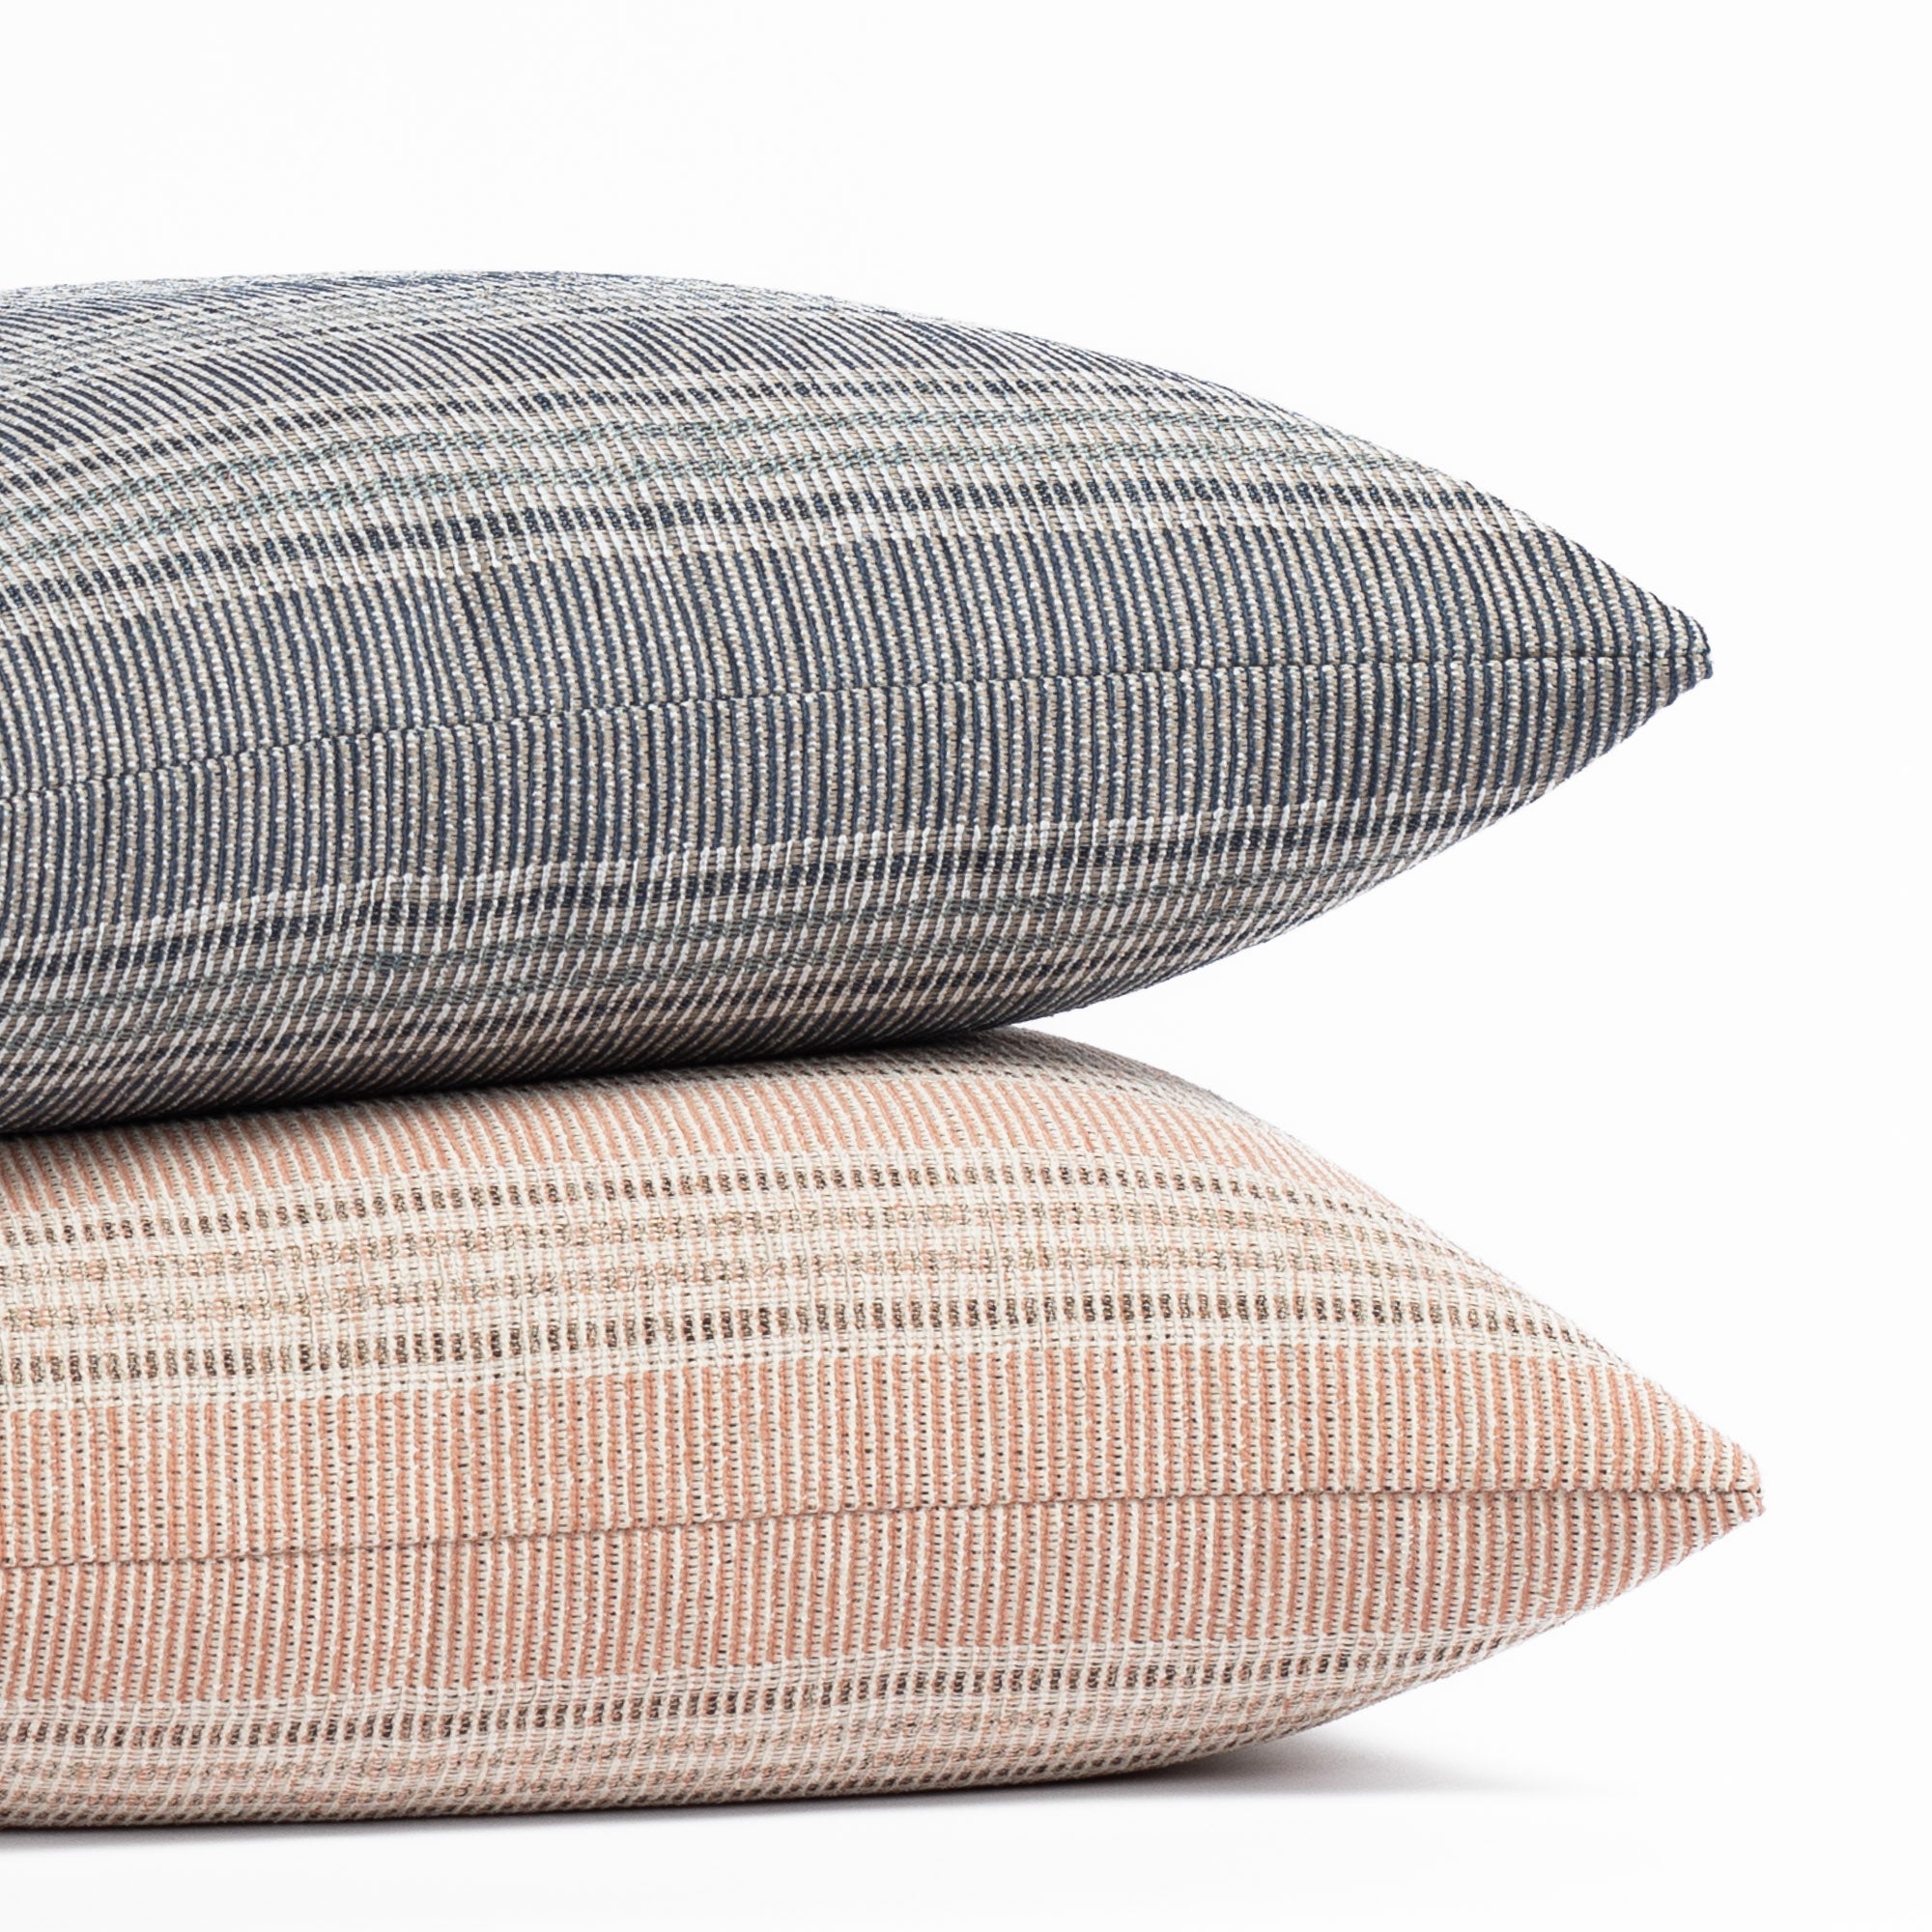 Tonic Living Outdoor Pillows : Sonoma Stripe pillows in mist and clay colorways